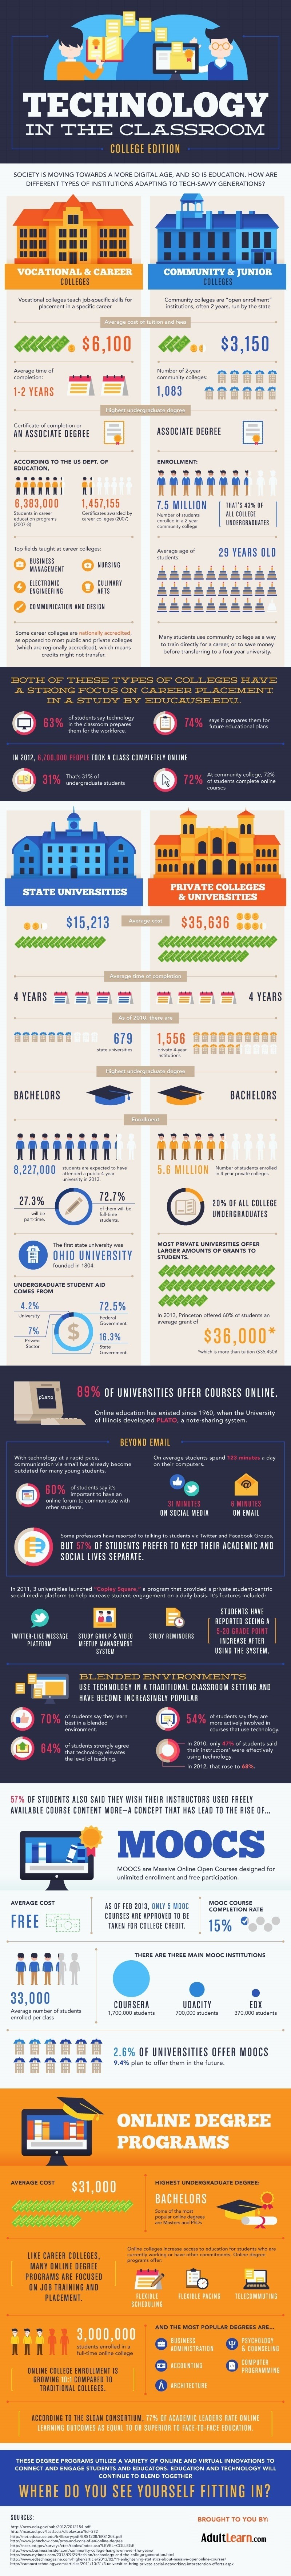 Technology in the College Classroom Infographic